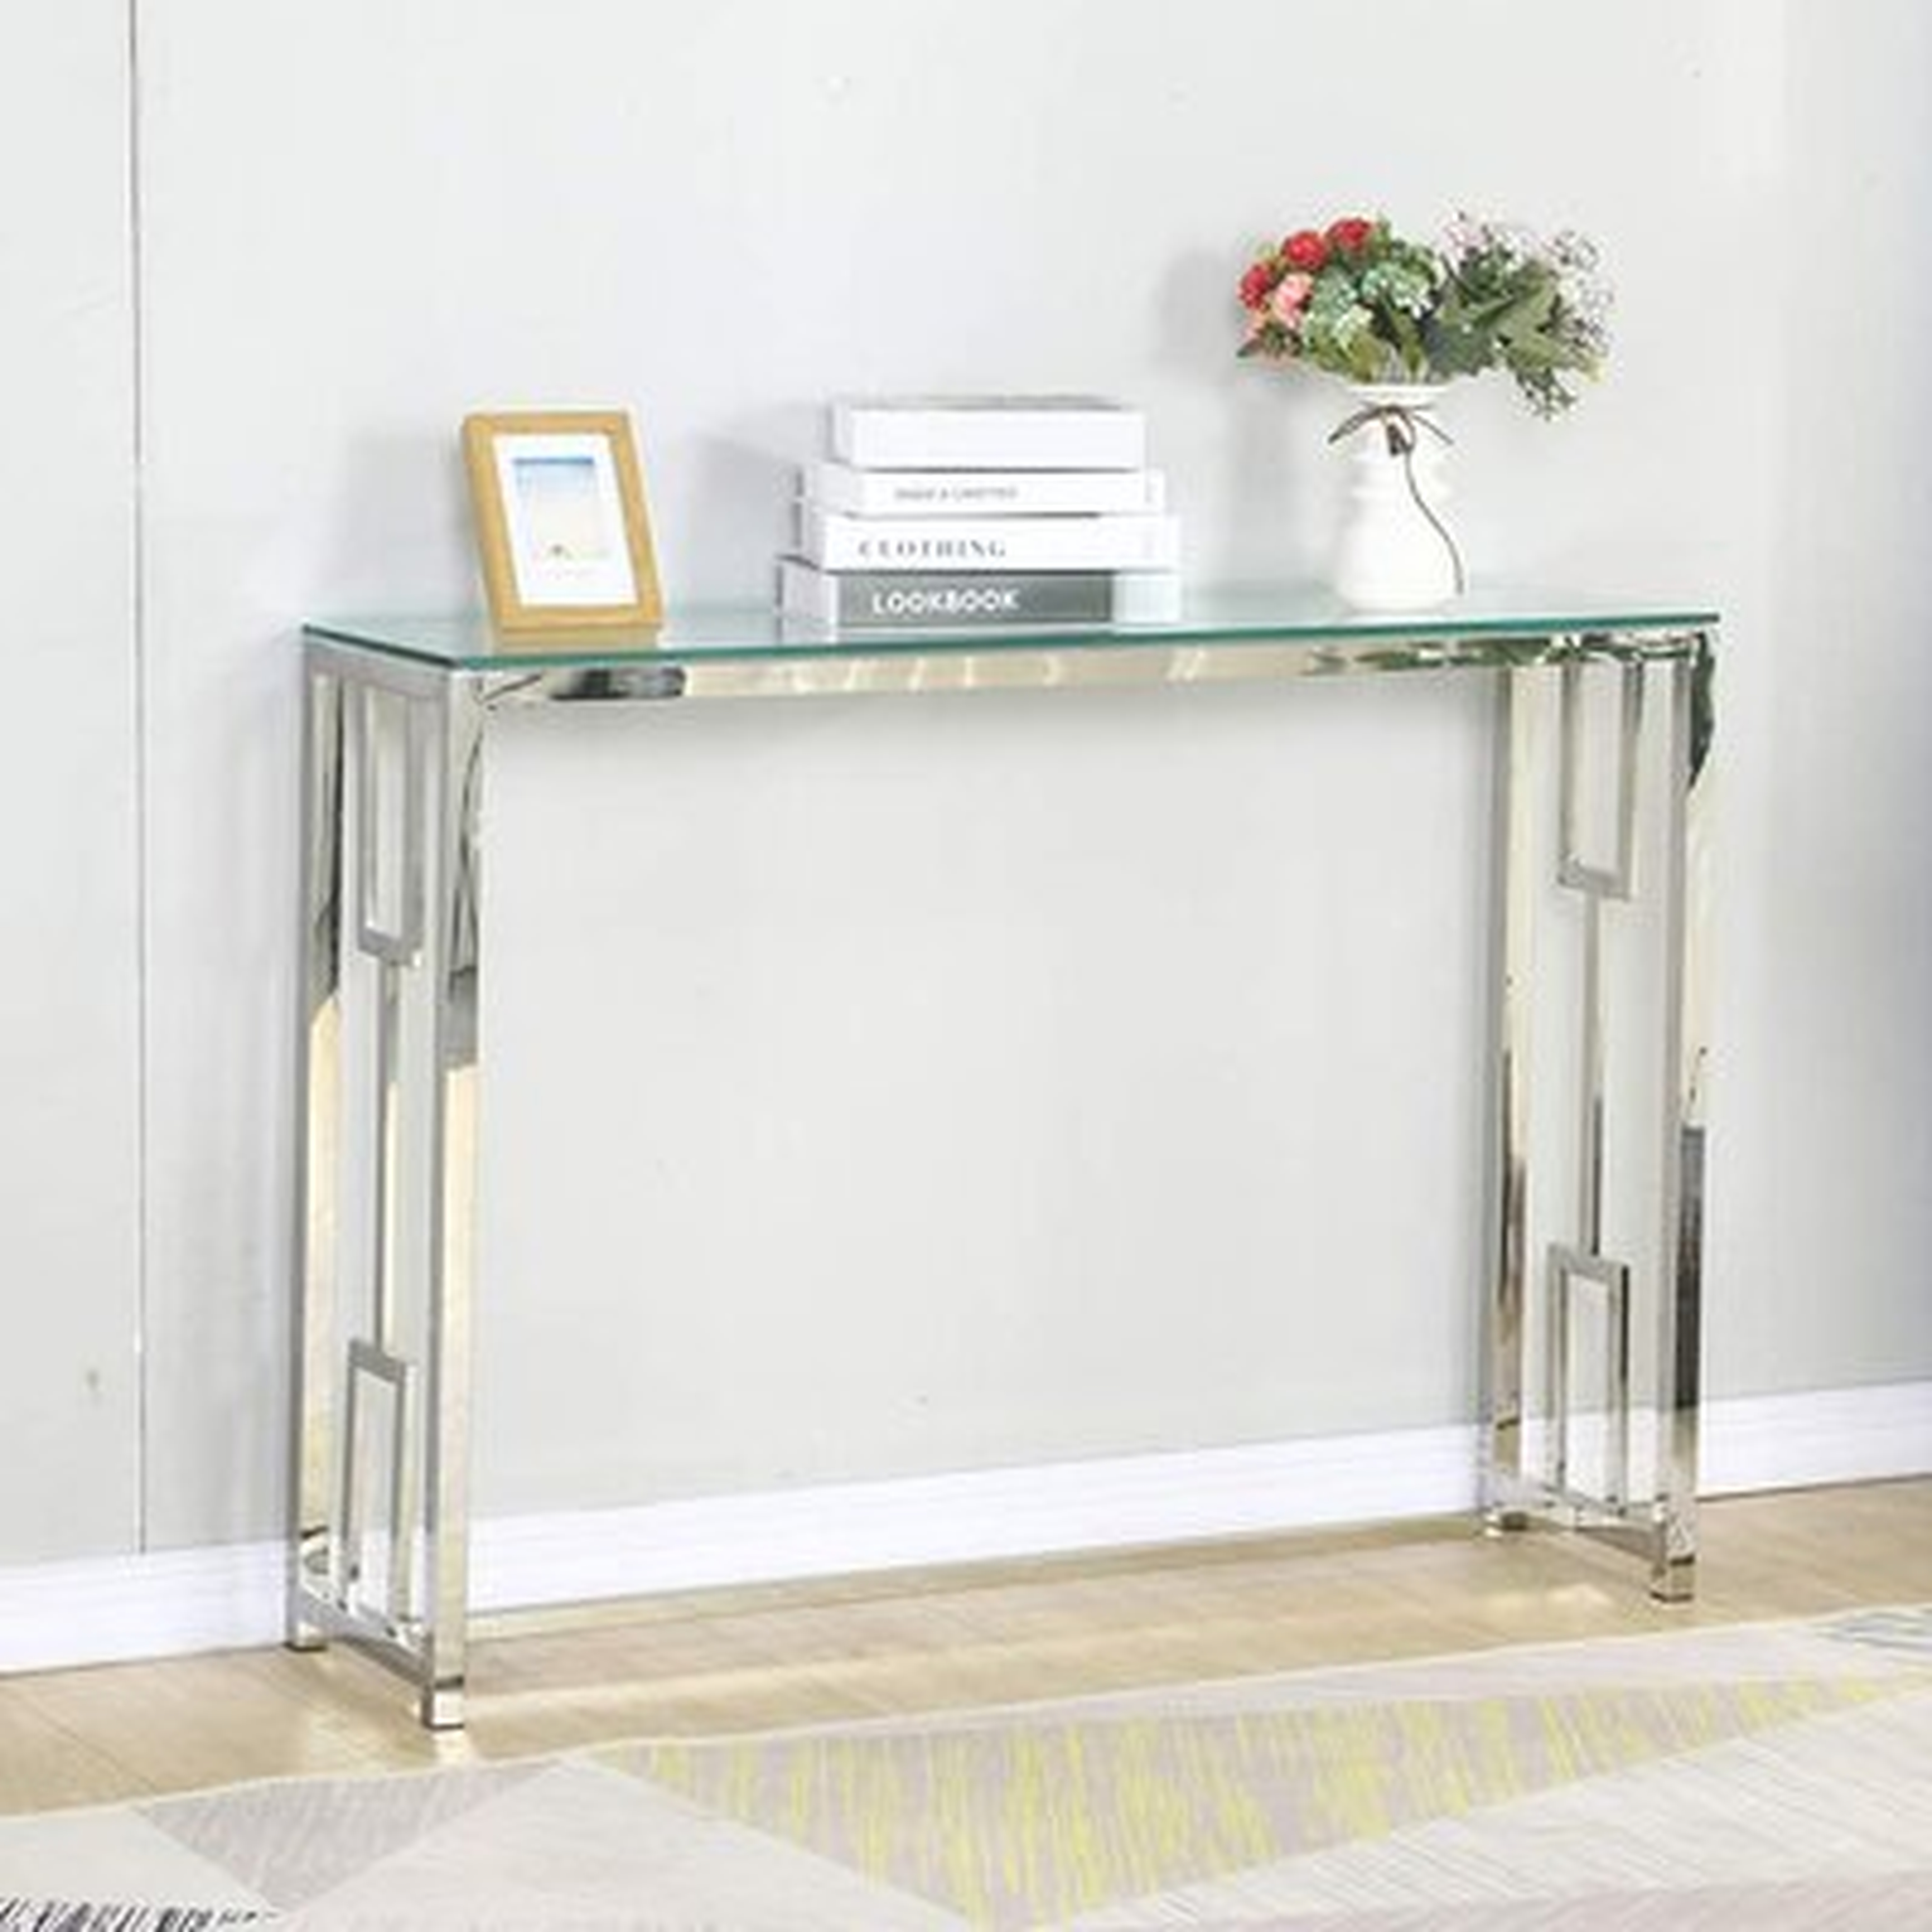 Modern Narrow Silver Glass Console Tables For Hallway And Entryway - Wayfair